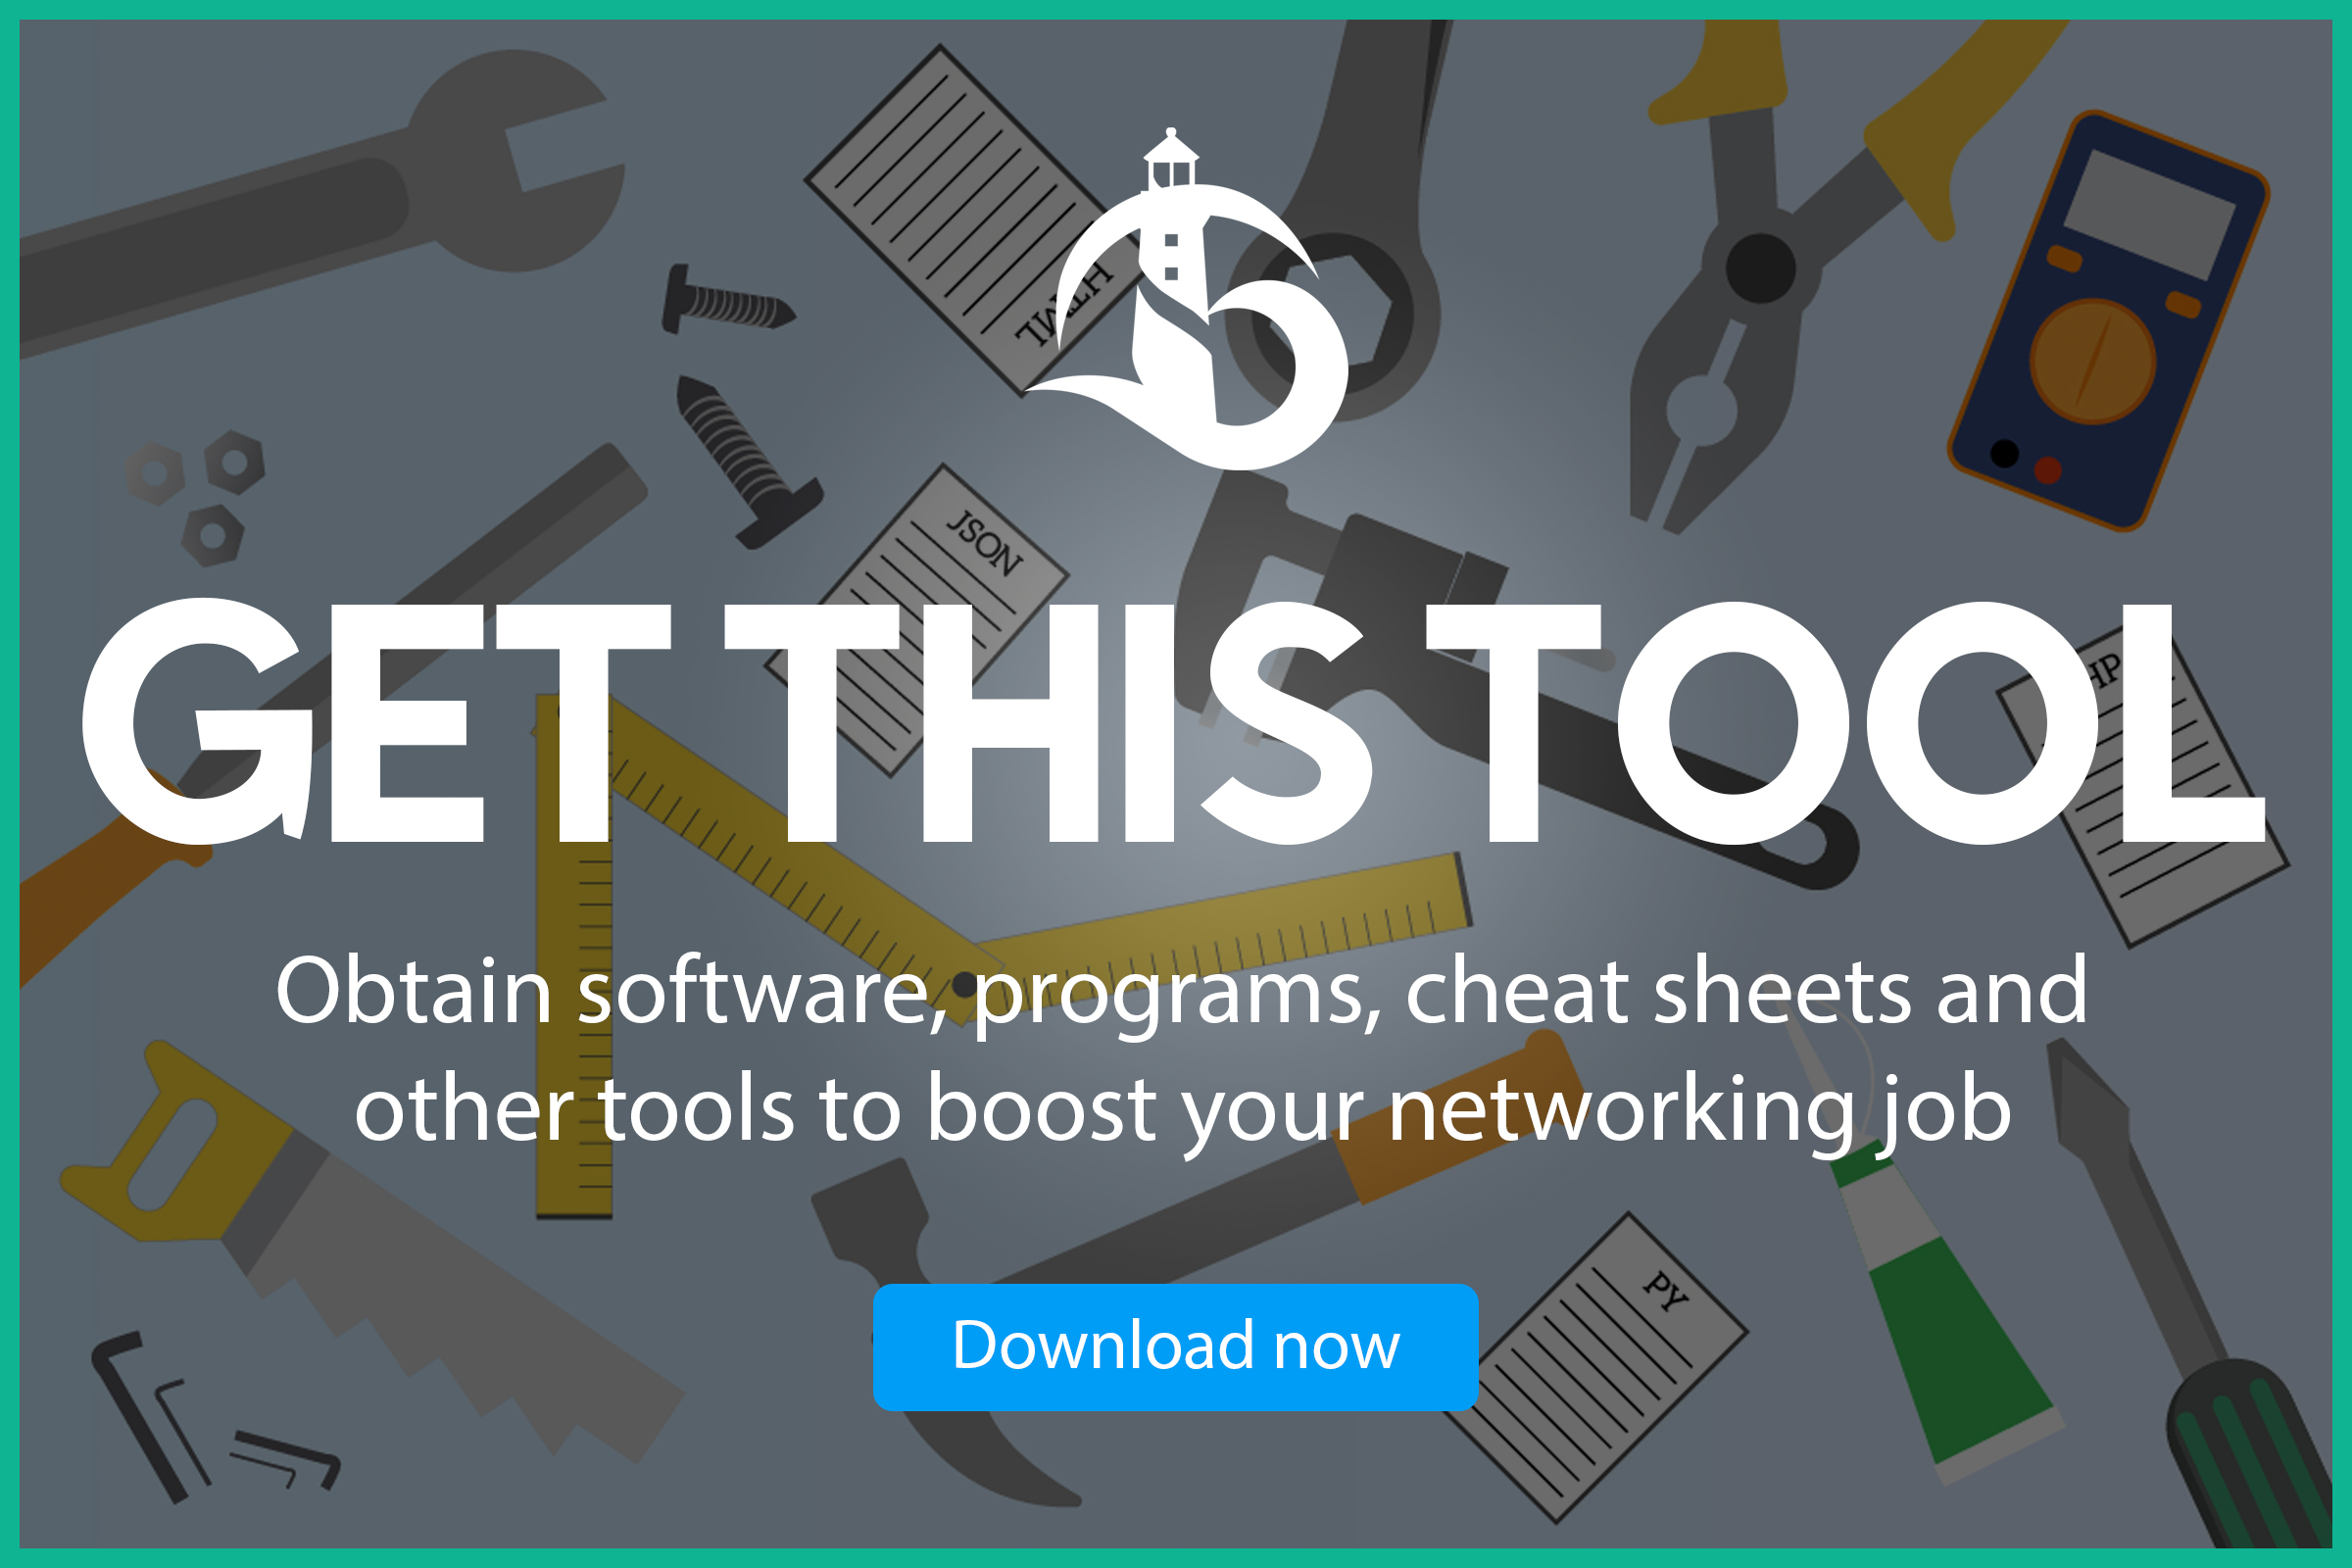 Get this tool for your networking skills